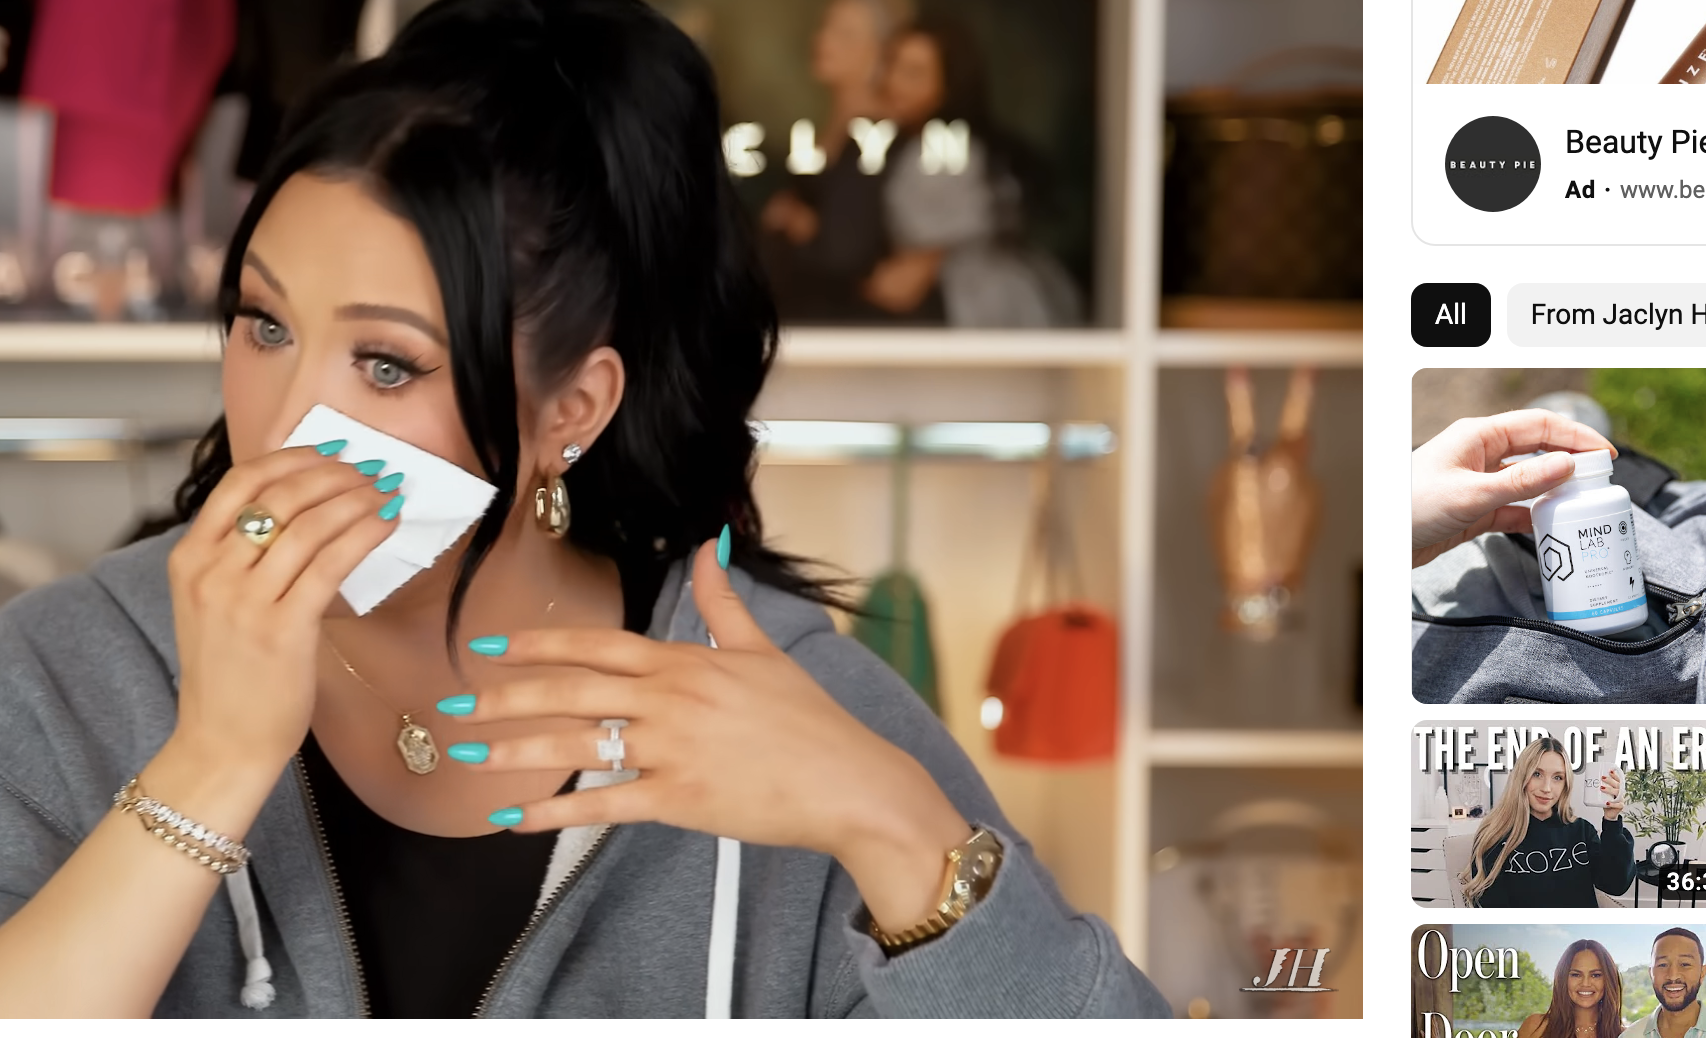 Why I Can't Trust Jaclyn Hill Anymore - The Lipstick Narratives